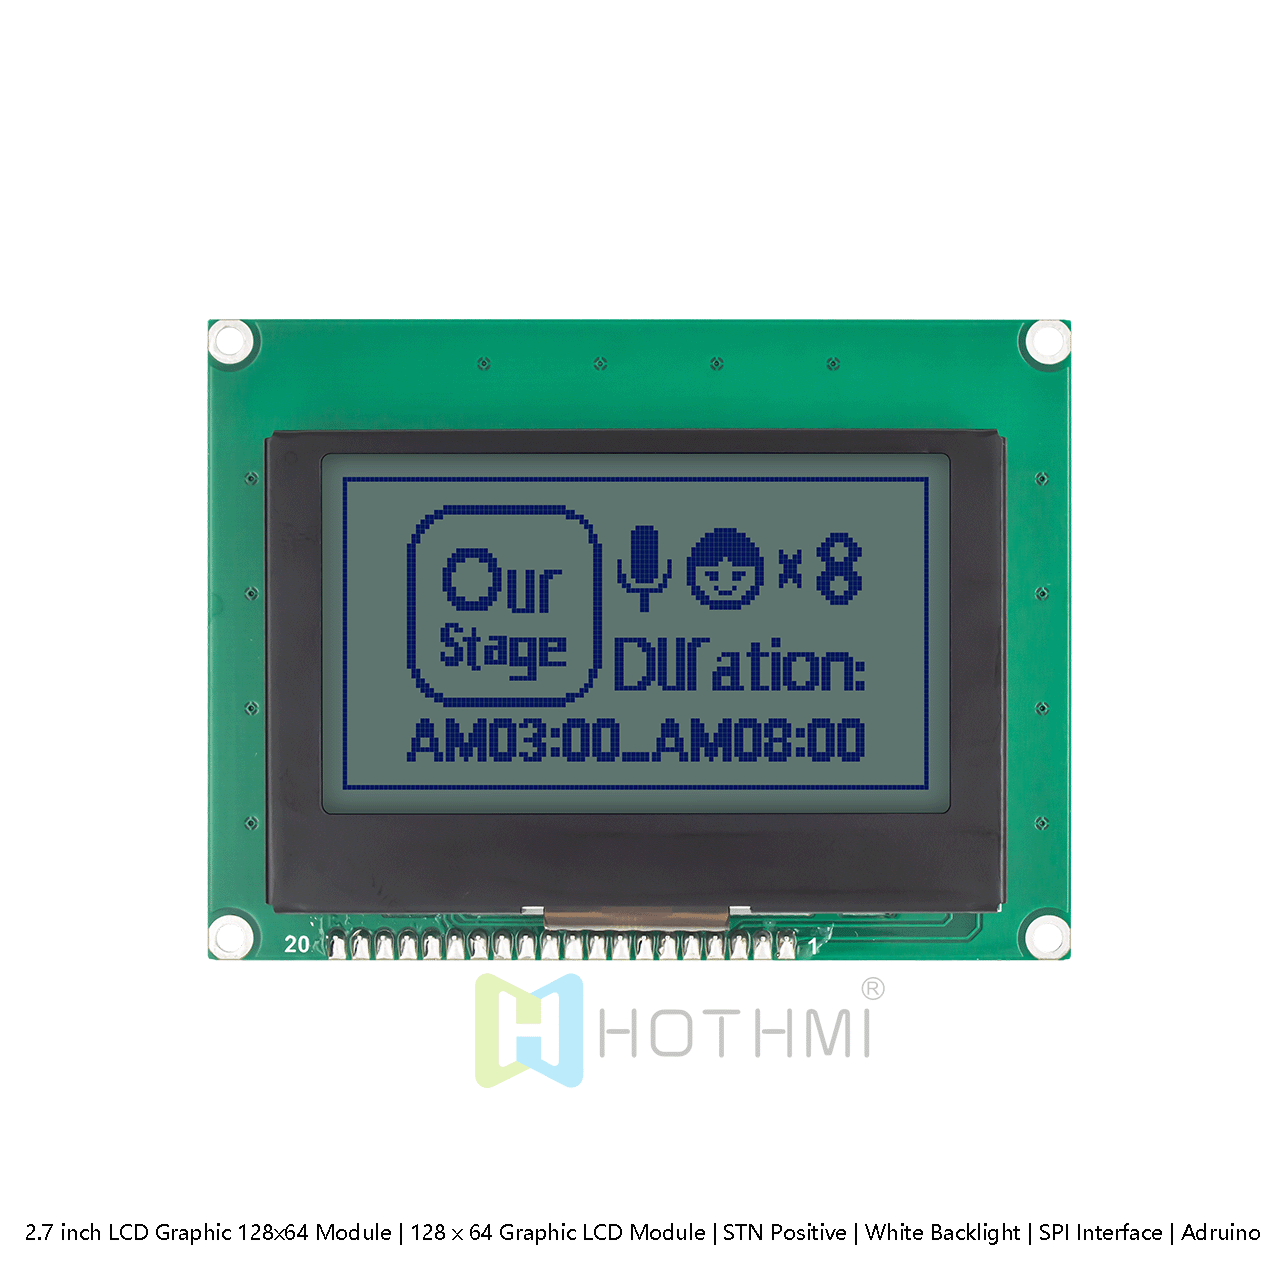 2.7 inch LCD Graphic 128x64 Module | 128 x 64 Graphic LCD Module | STN Positive | White Backlight | SPI Interface | Adruino | Gray Background Blue Characters